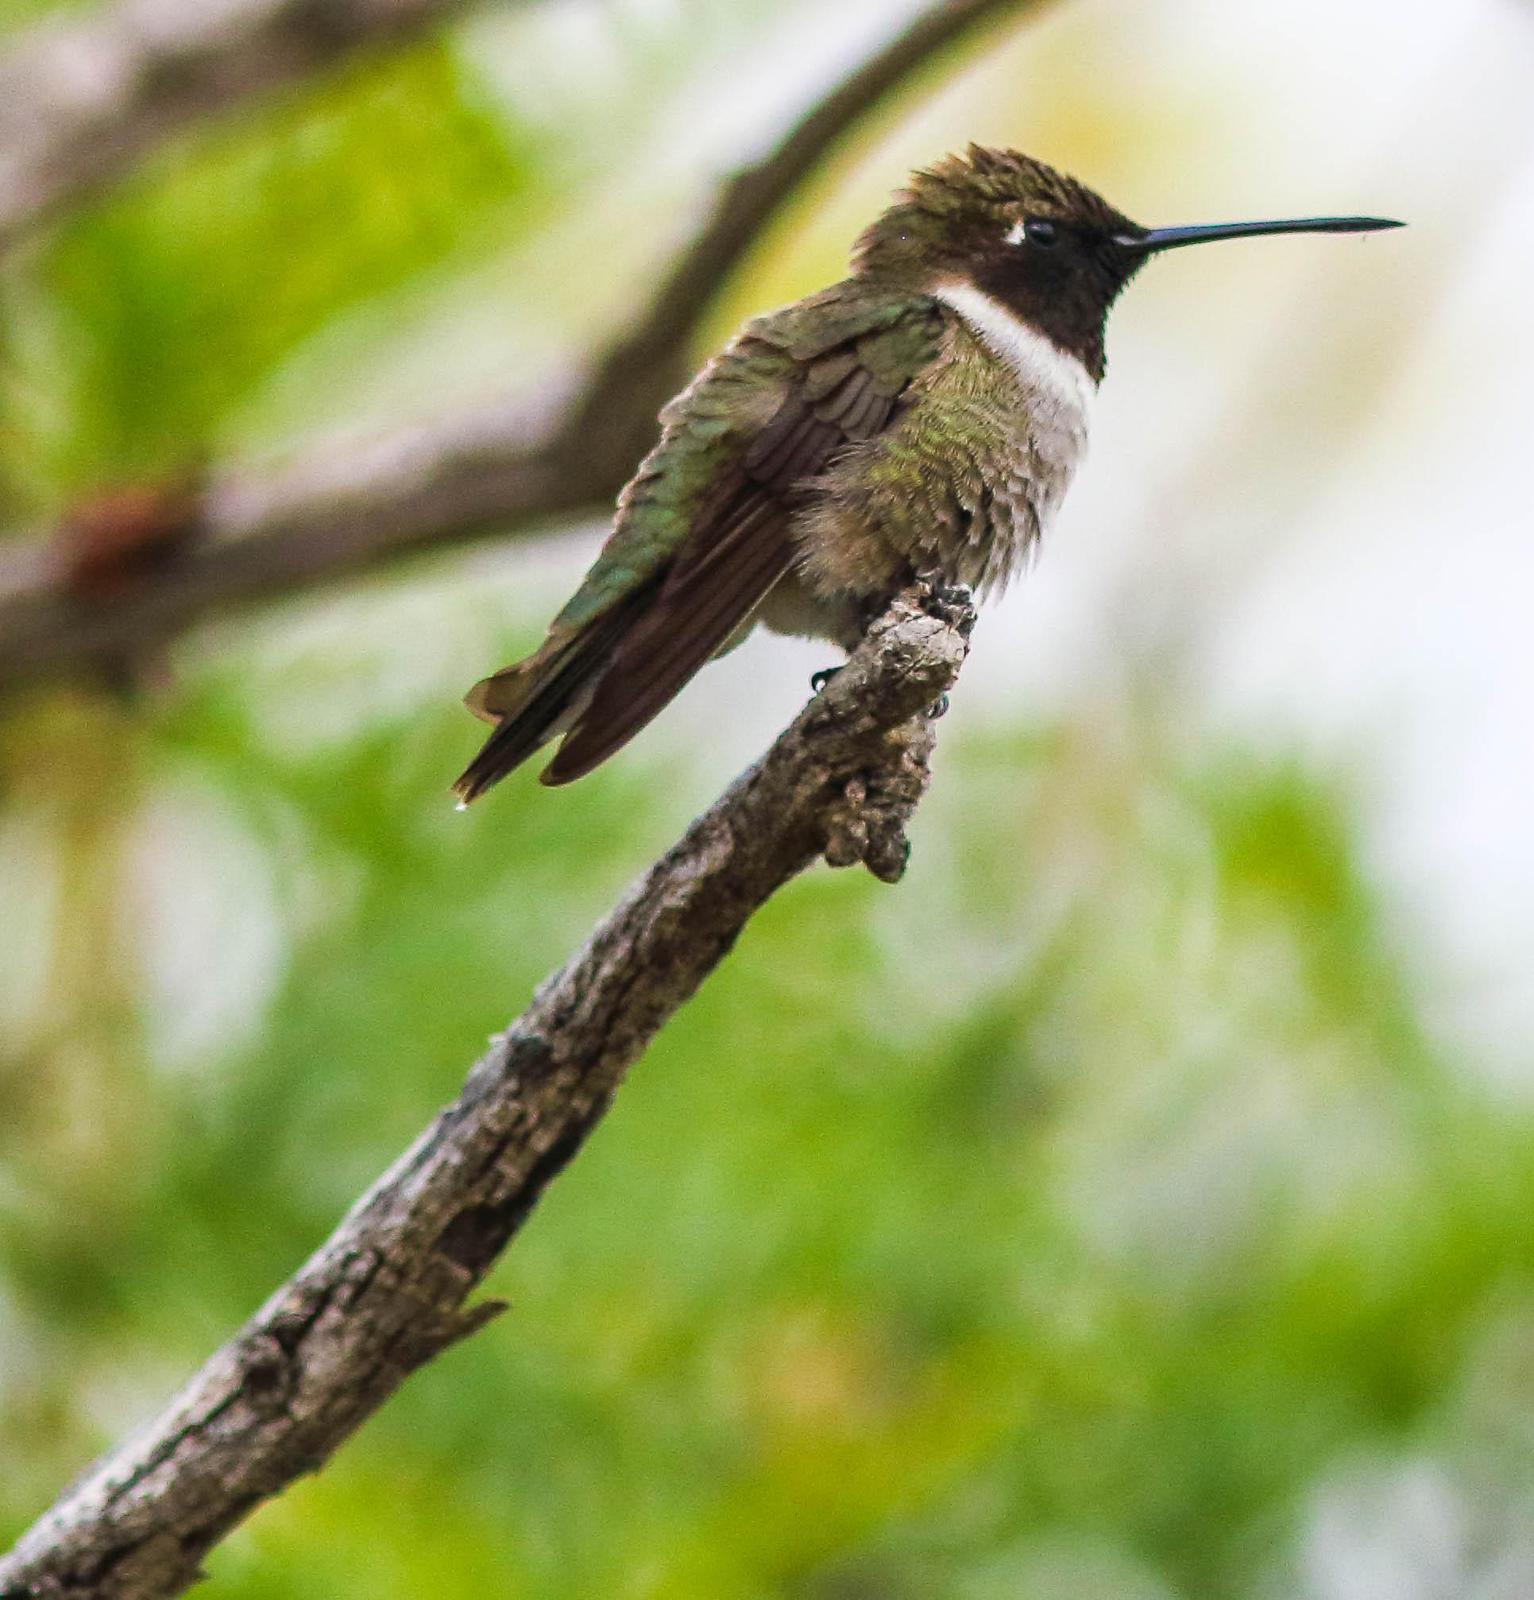 Black-chinned Hummingbird Photo by Terry Campbell